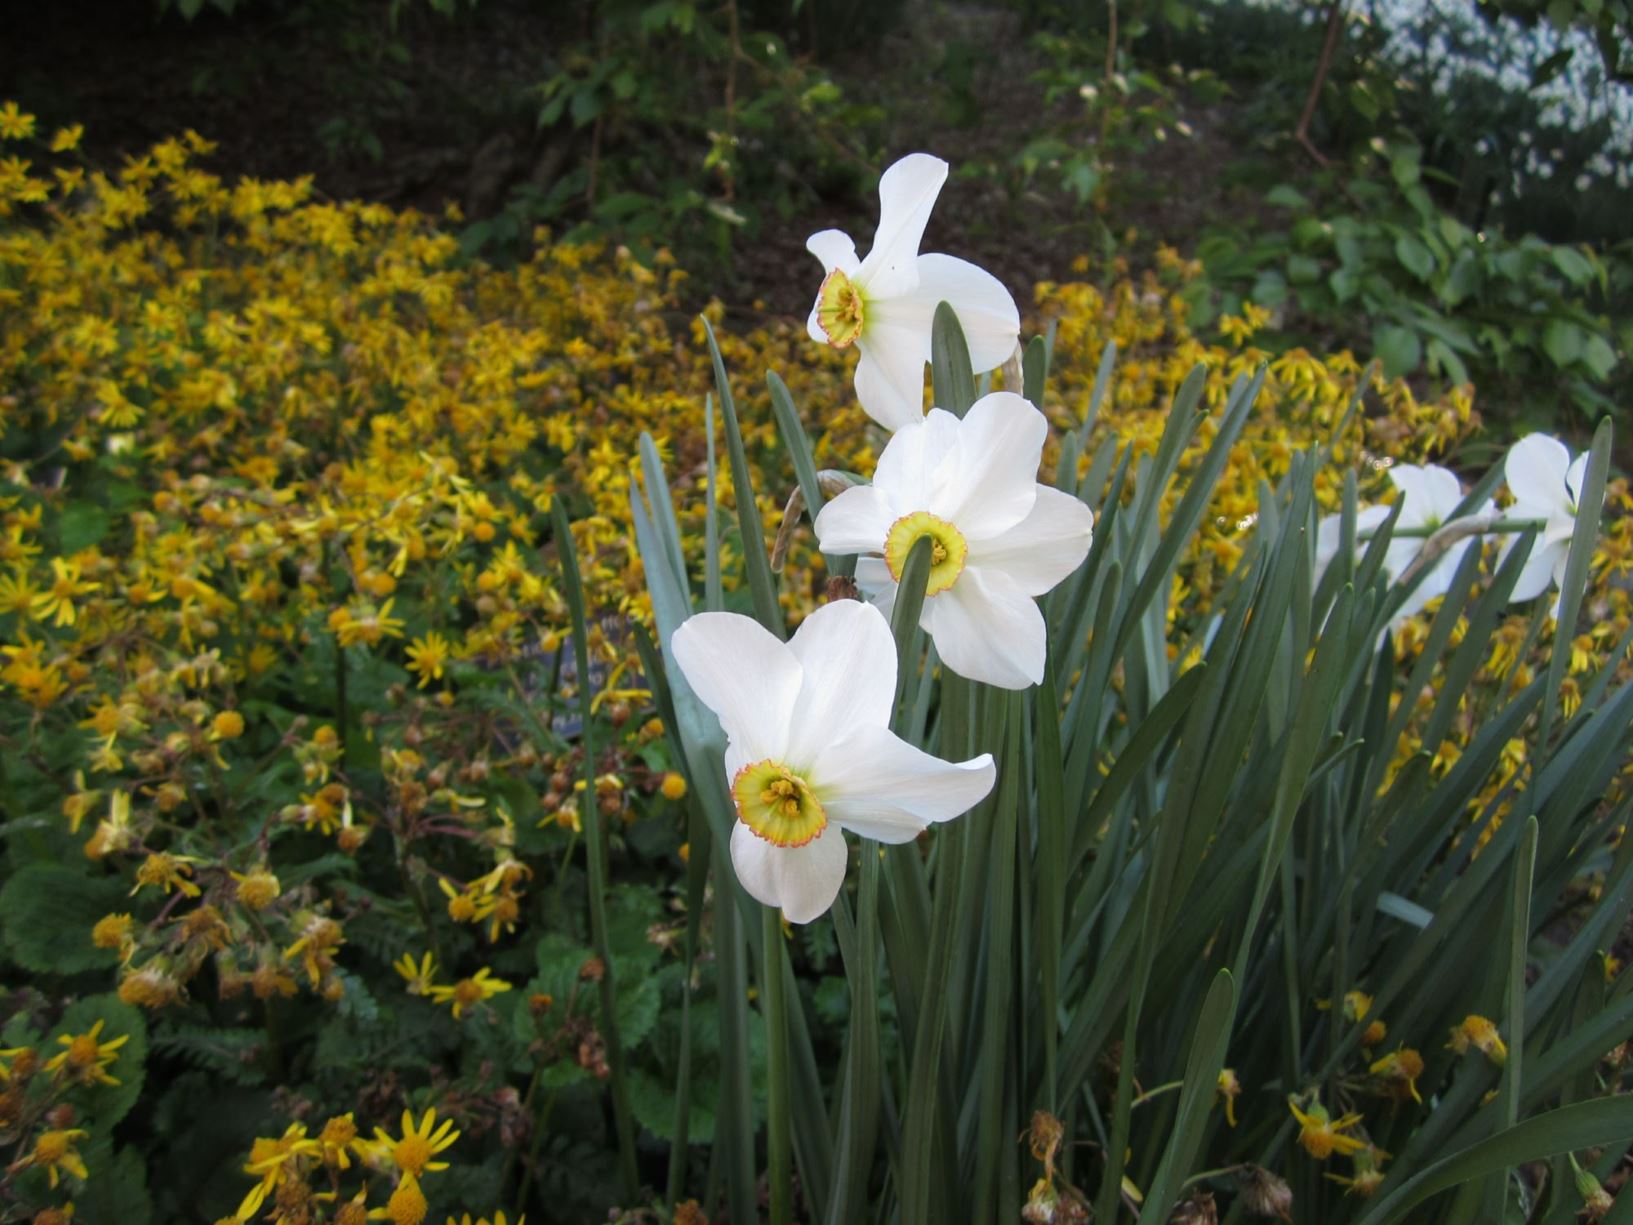 Narcissus 'Eve's Poet' - poeticus daffodil